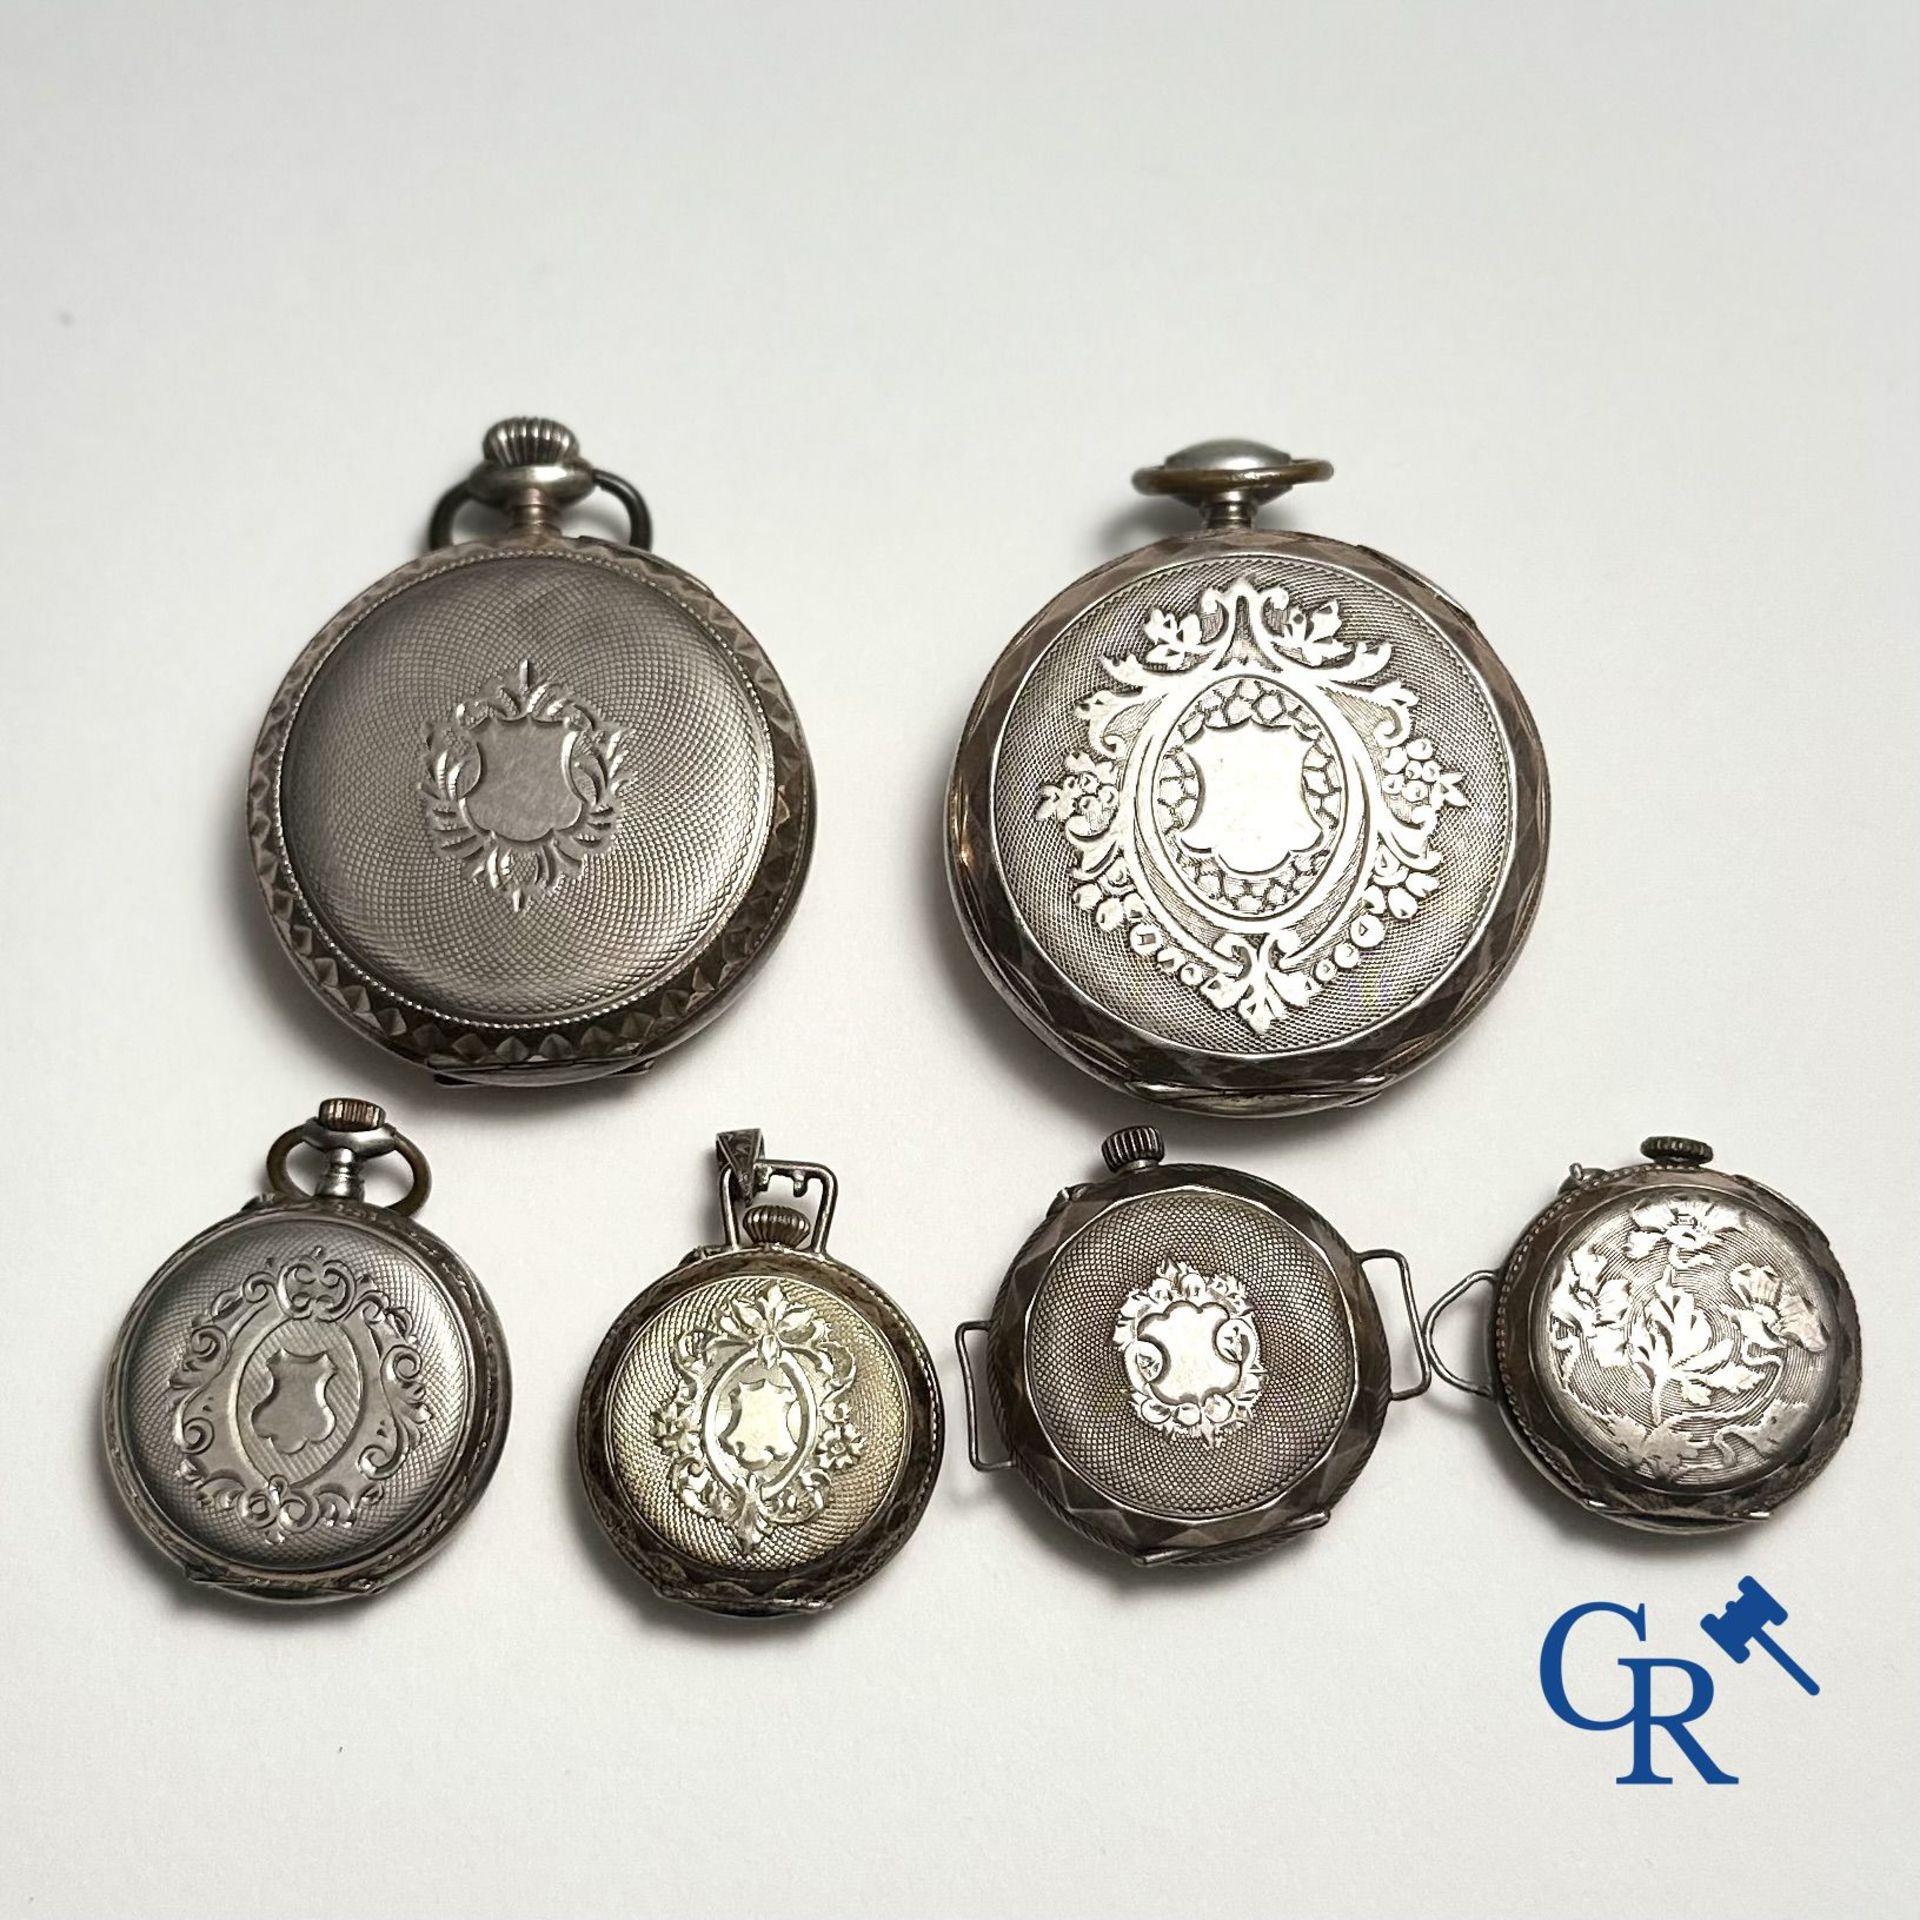 Watches: Lot consisting of 2 pocket watches and 4 ladies watches in silver (800°/00) - Image 2 of 4